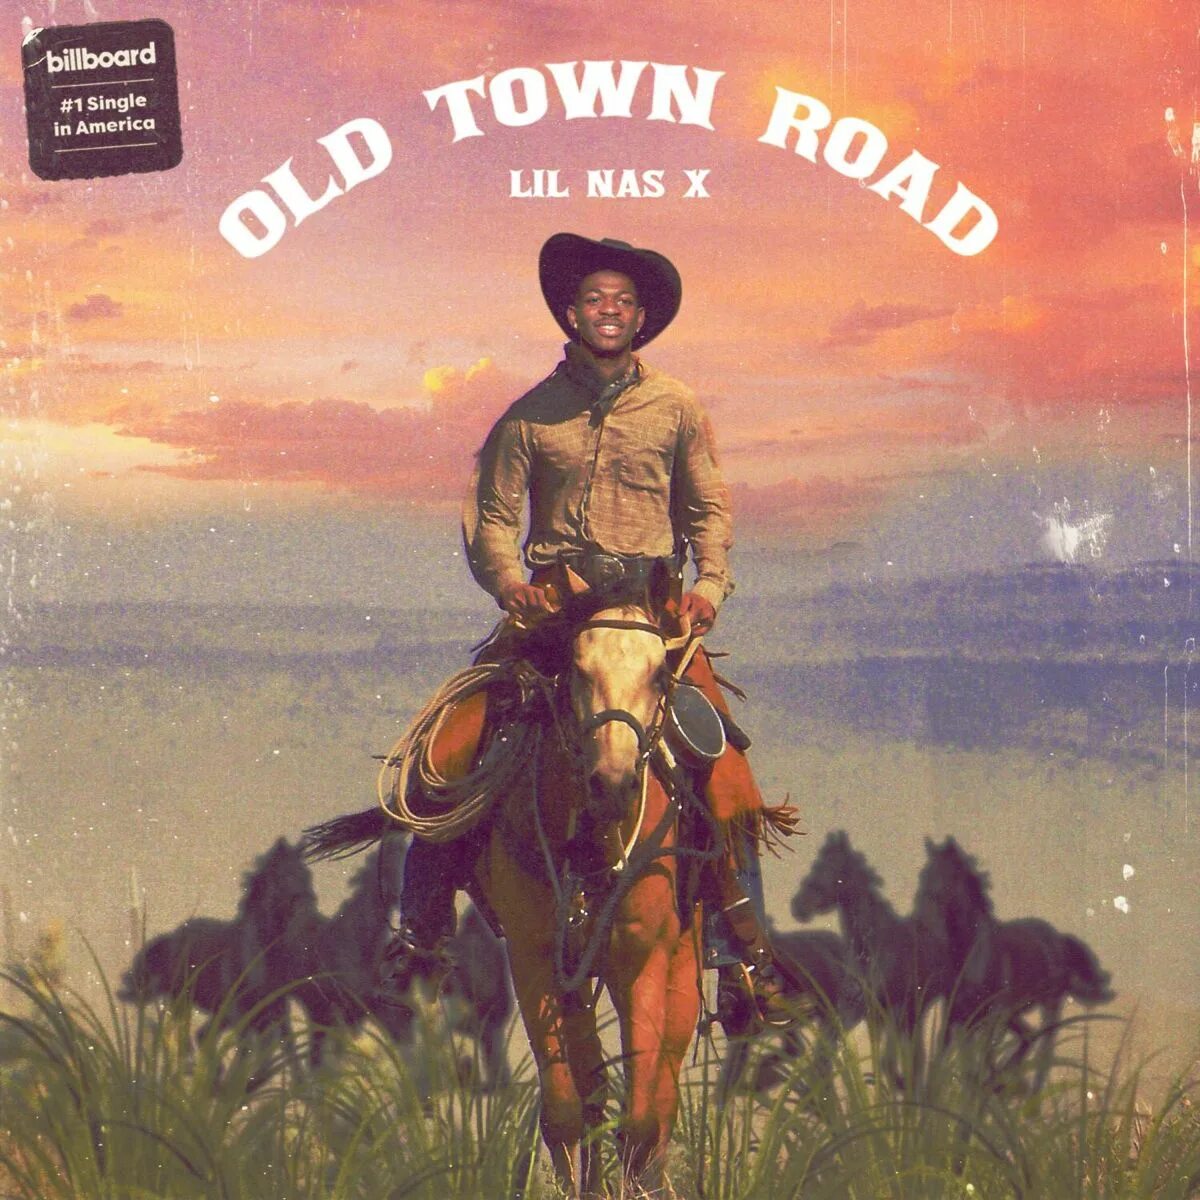 Lil nas x old Town Road. Old Town Road обложка. Lil nas x - old Town Road ft. Billy ray Cyrus. Old Town Road Remix обложка.